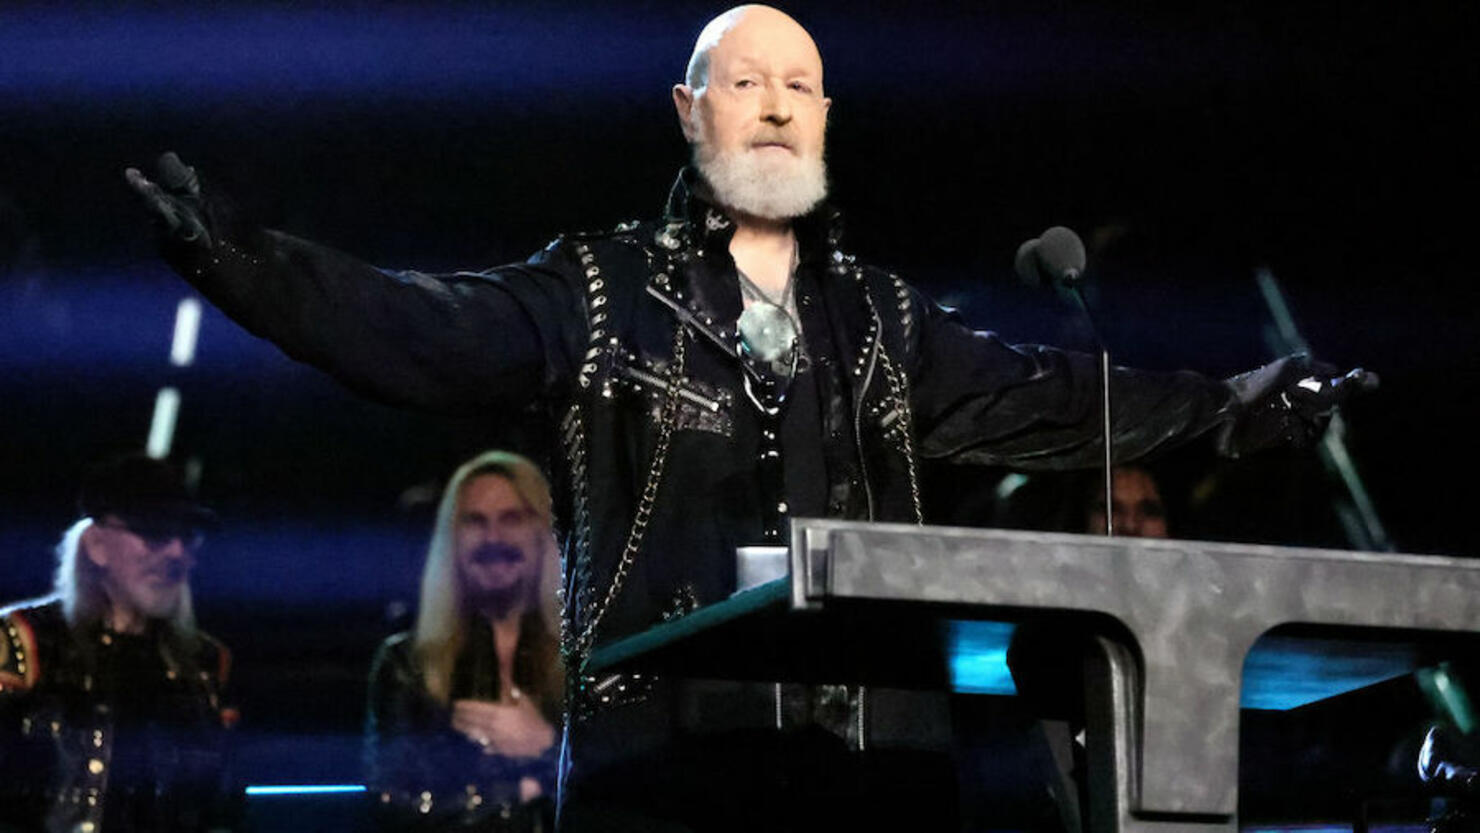 Judas Priest brings true sound and look of metal to the Rock Hall 